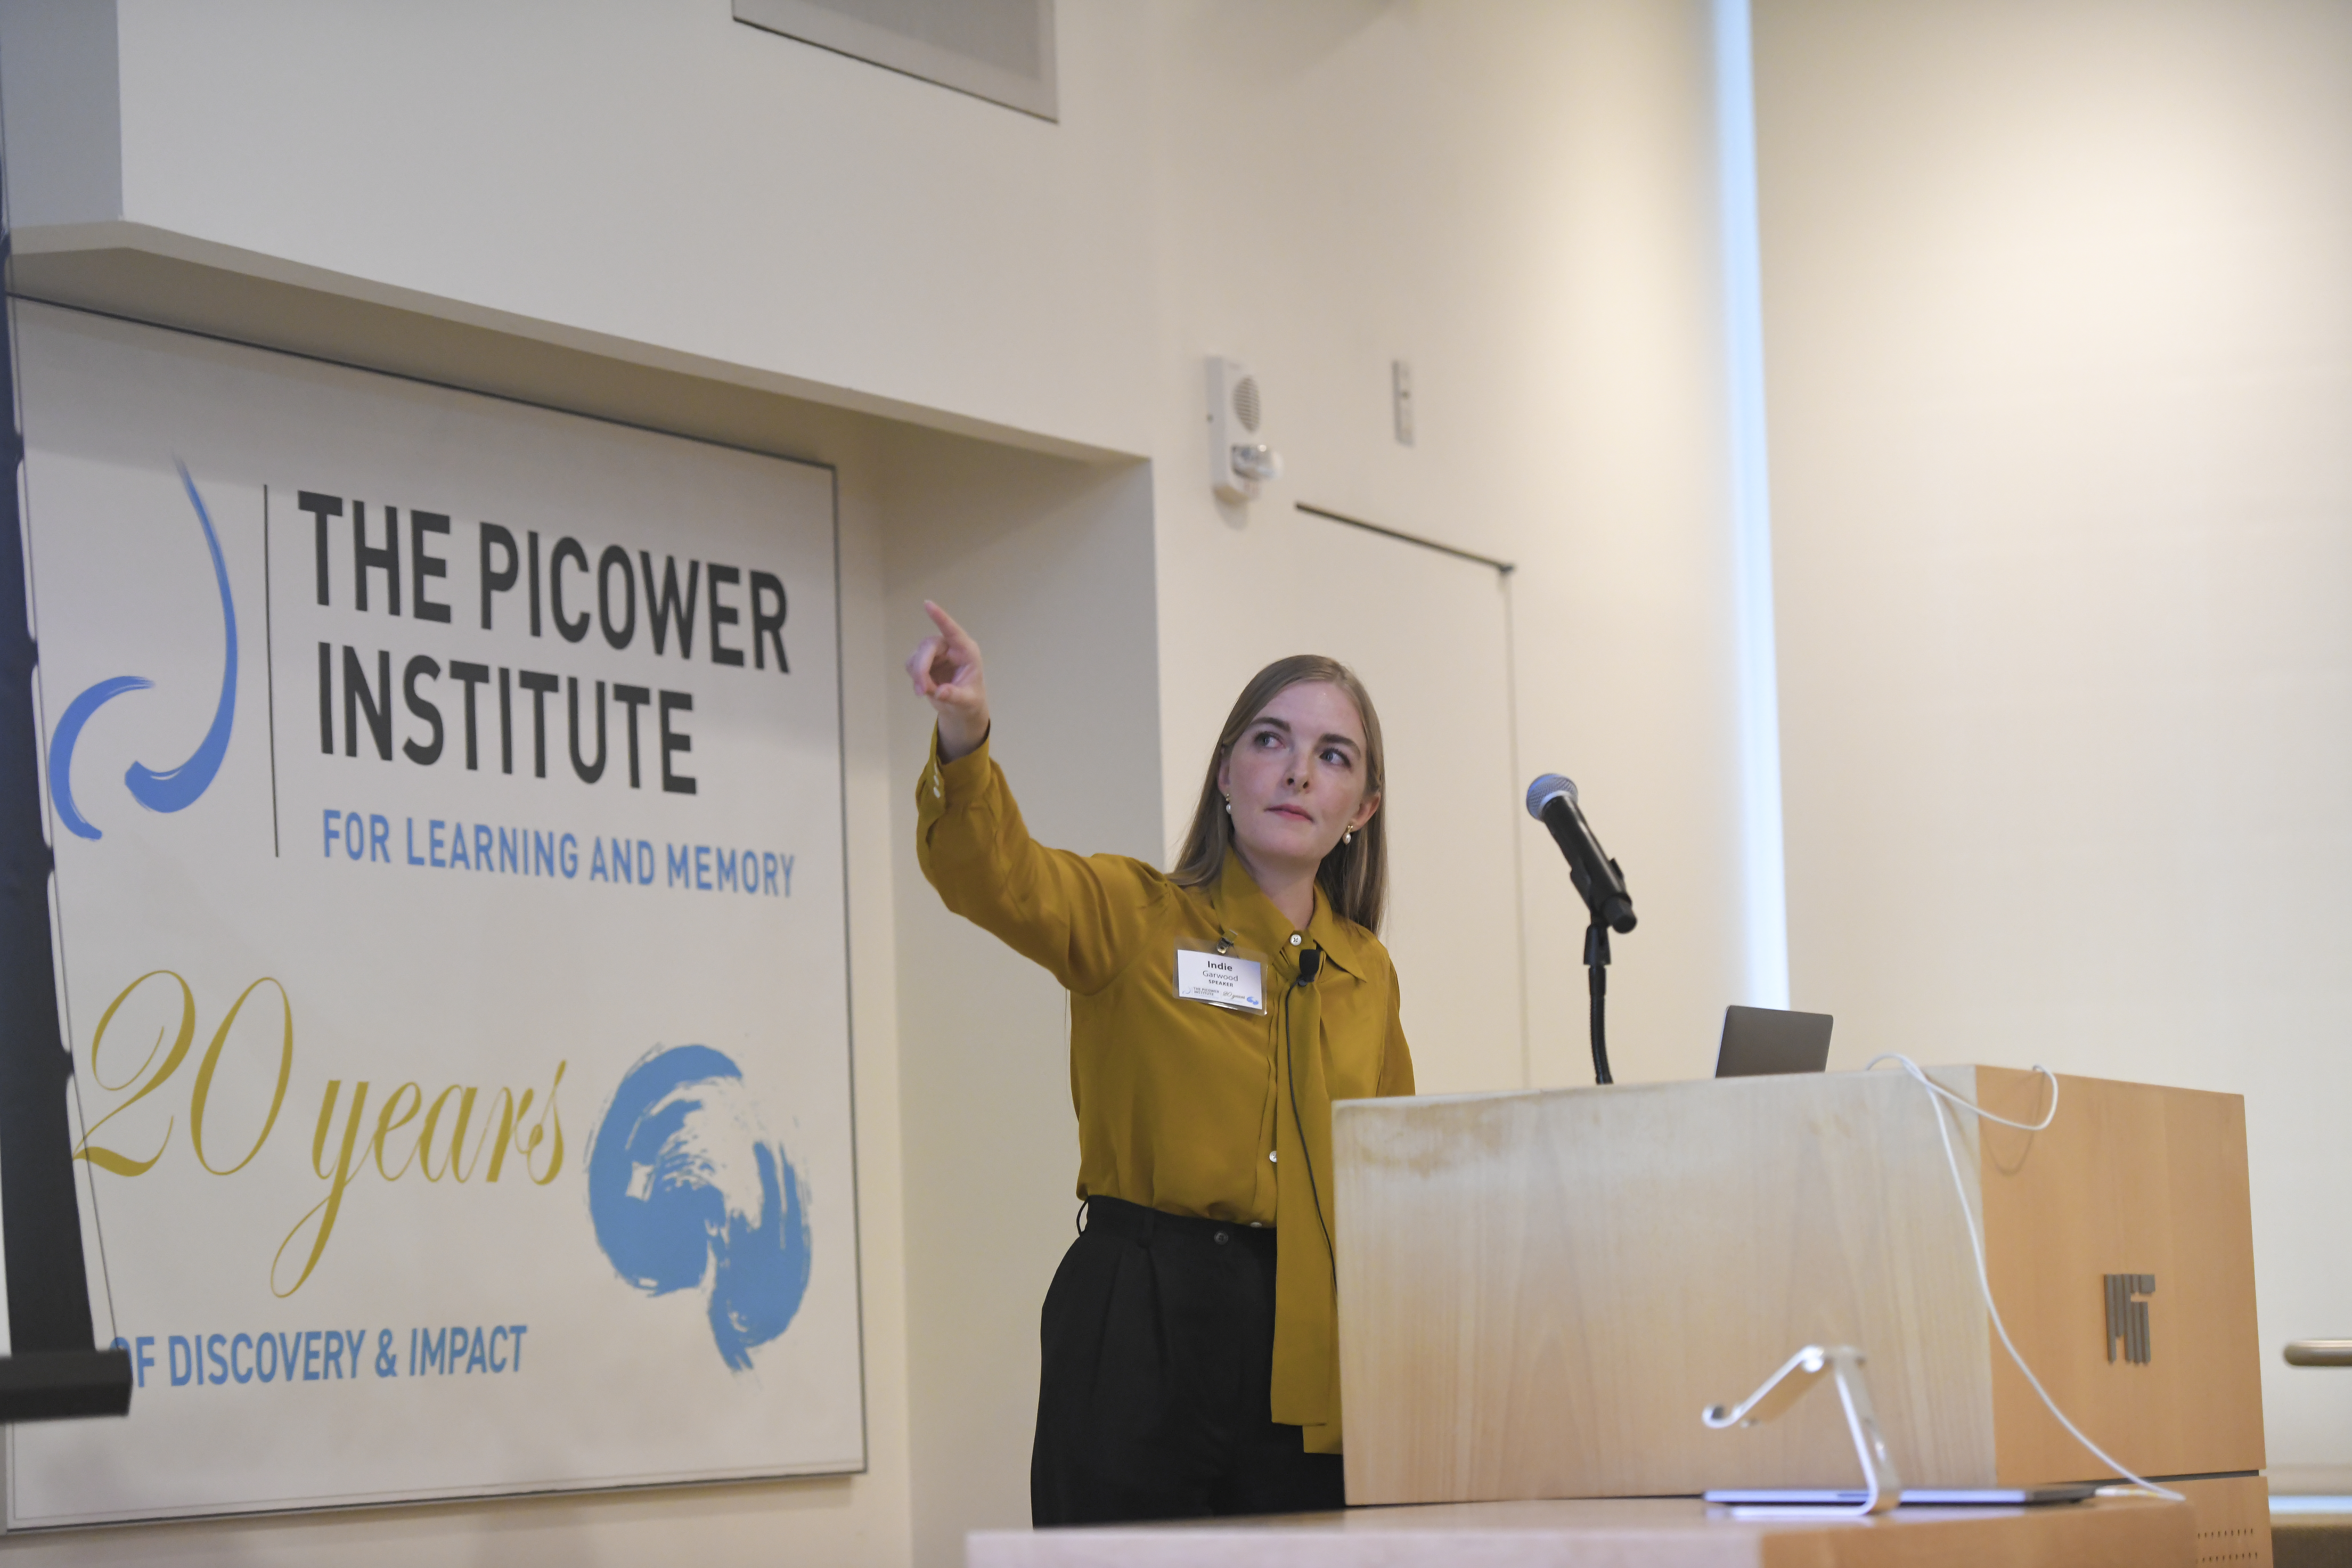 Indie Garwood stands at a podium during her presentation and points to her right (toward an unseen screen). Behind her is a sign showing the Picower Institute 20th Annivesary logo and 